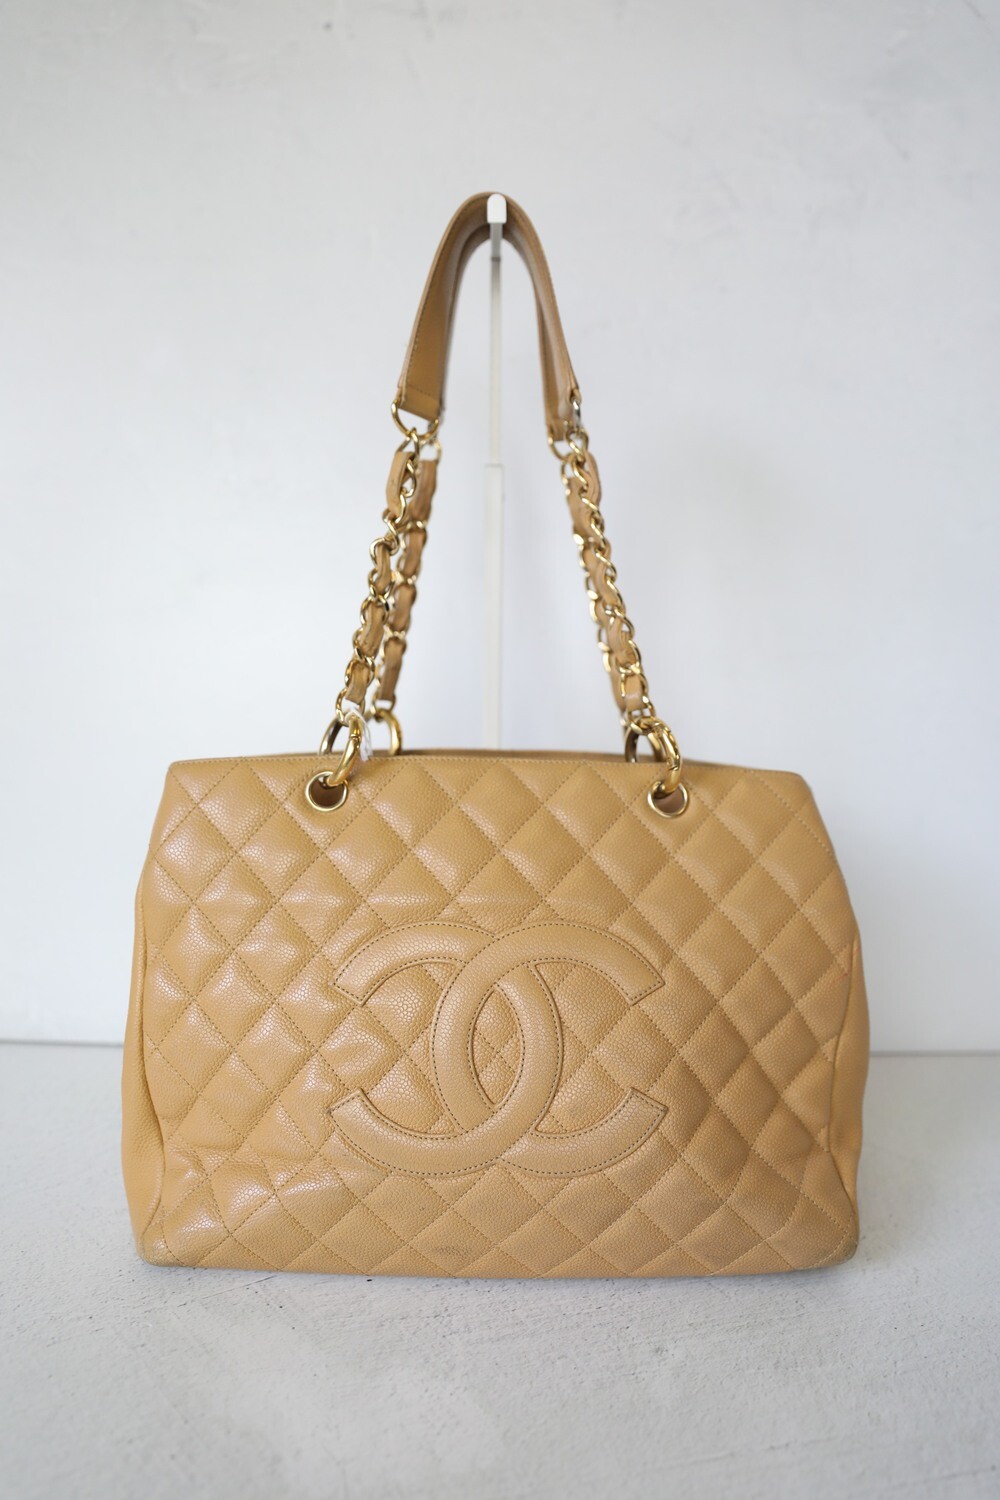 Chanel Grand Shopping Tote GST, Beige Caviar with Gold Hardware, Preowned  No Dustbag WA001